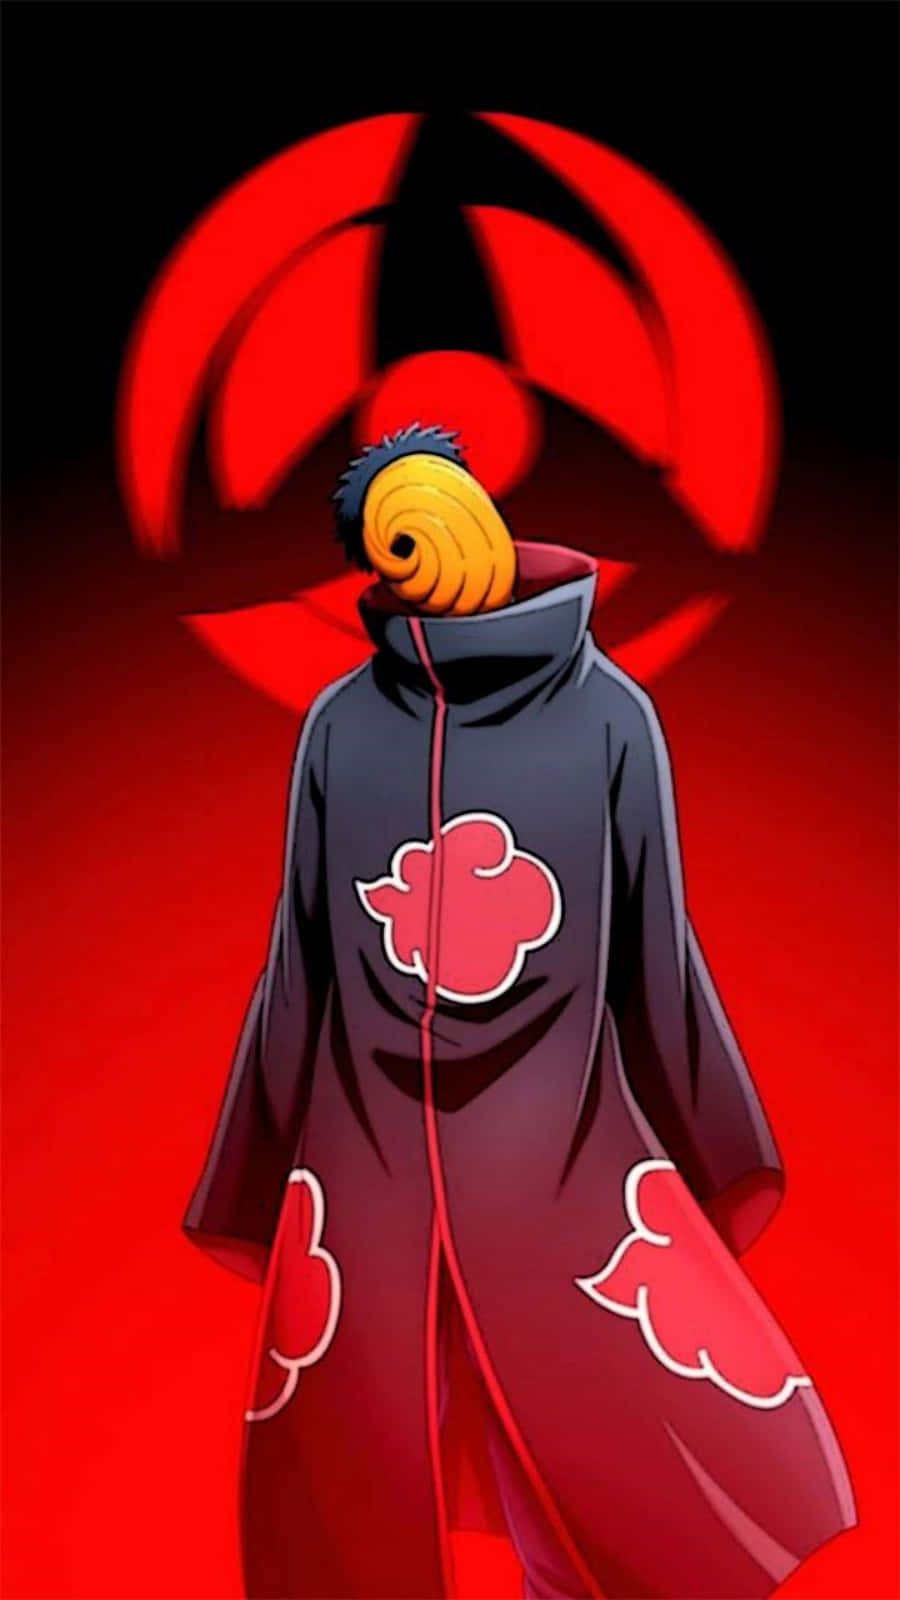 Naruto Shippuden Akatsuki Wallpaper iPhone with high-resolution 1080x1920 pixel. You can use this wallpaper for your iPhone 5, 6, 7, 8, X, XS, XR backgrounds, Mobile Screensaver, or iPad Lock Screen - Obito Uchiha